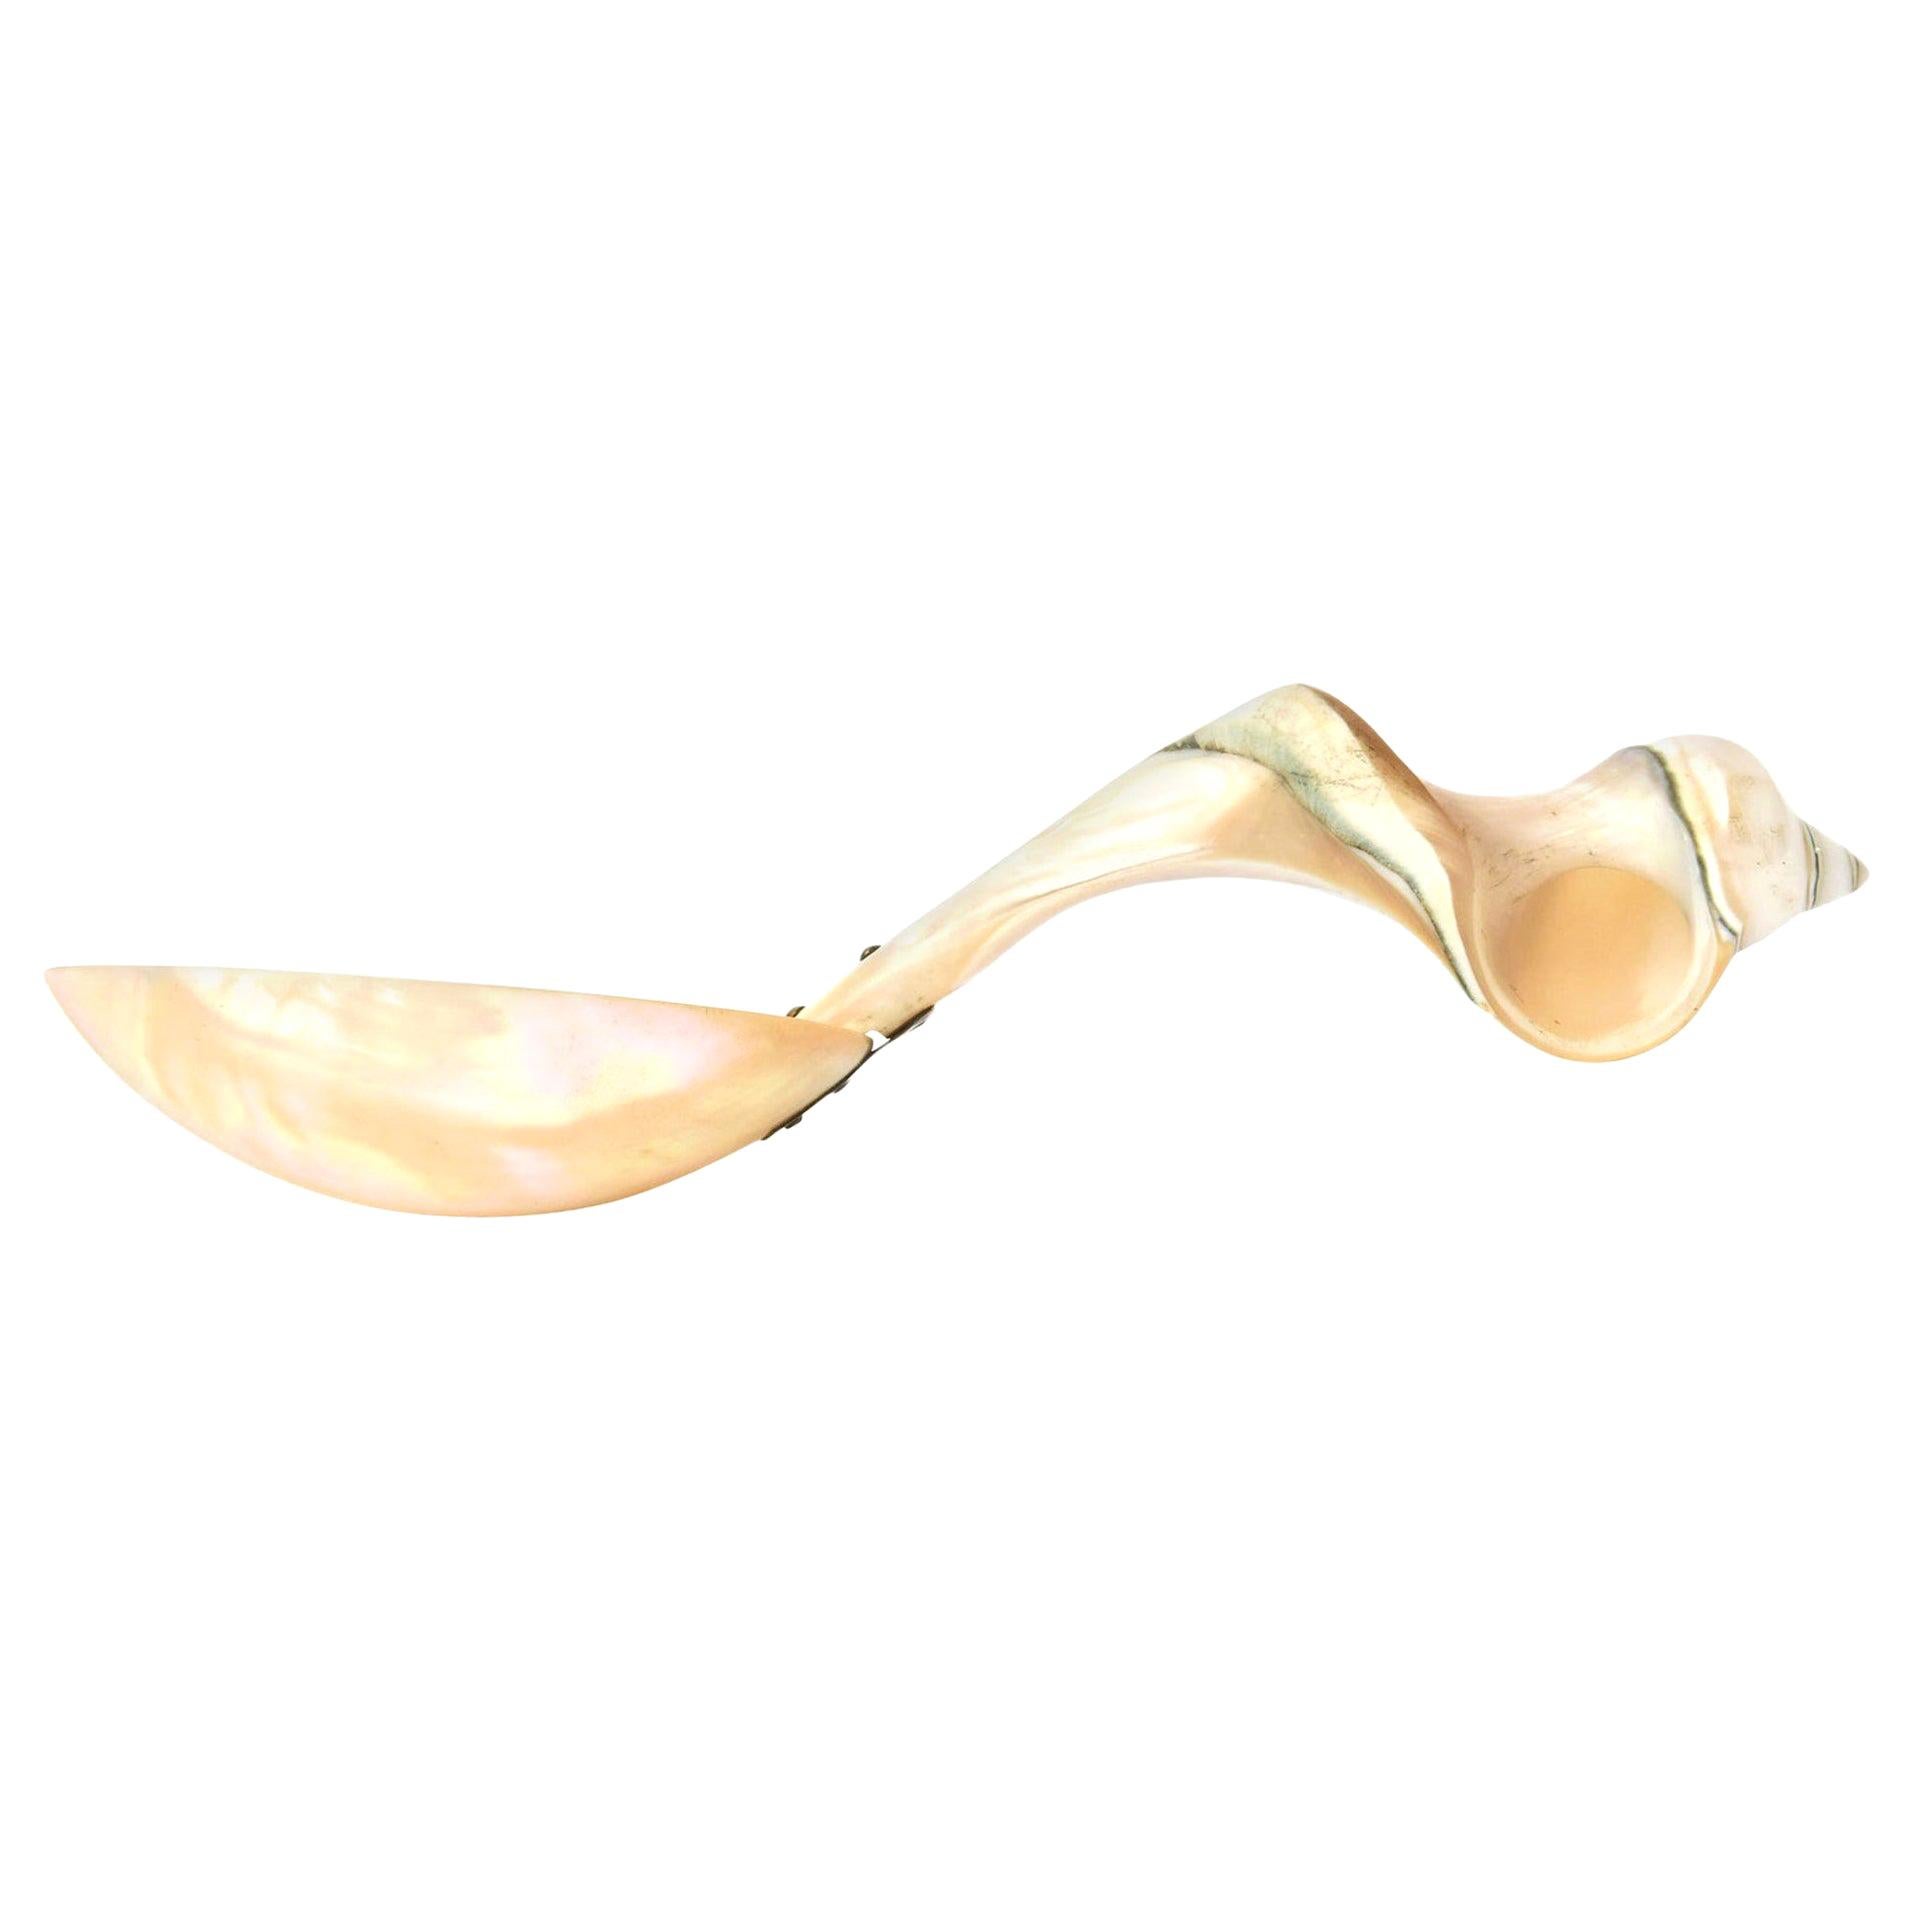 Mother of Pearl Organic Sculptural Serving Spoon